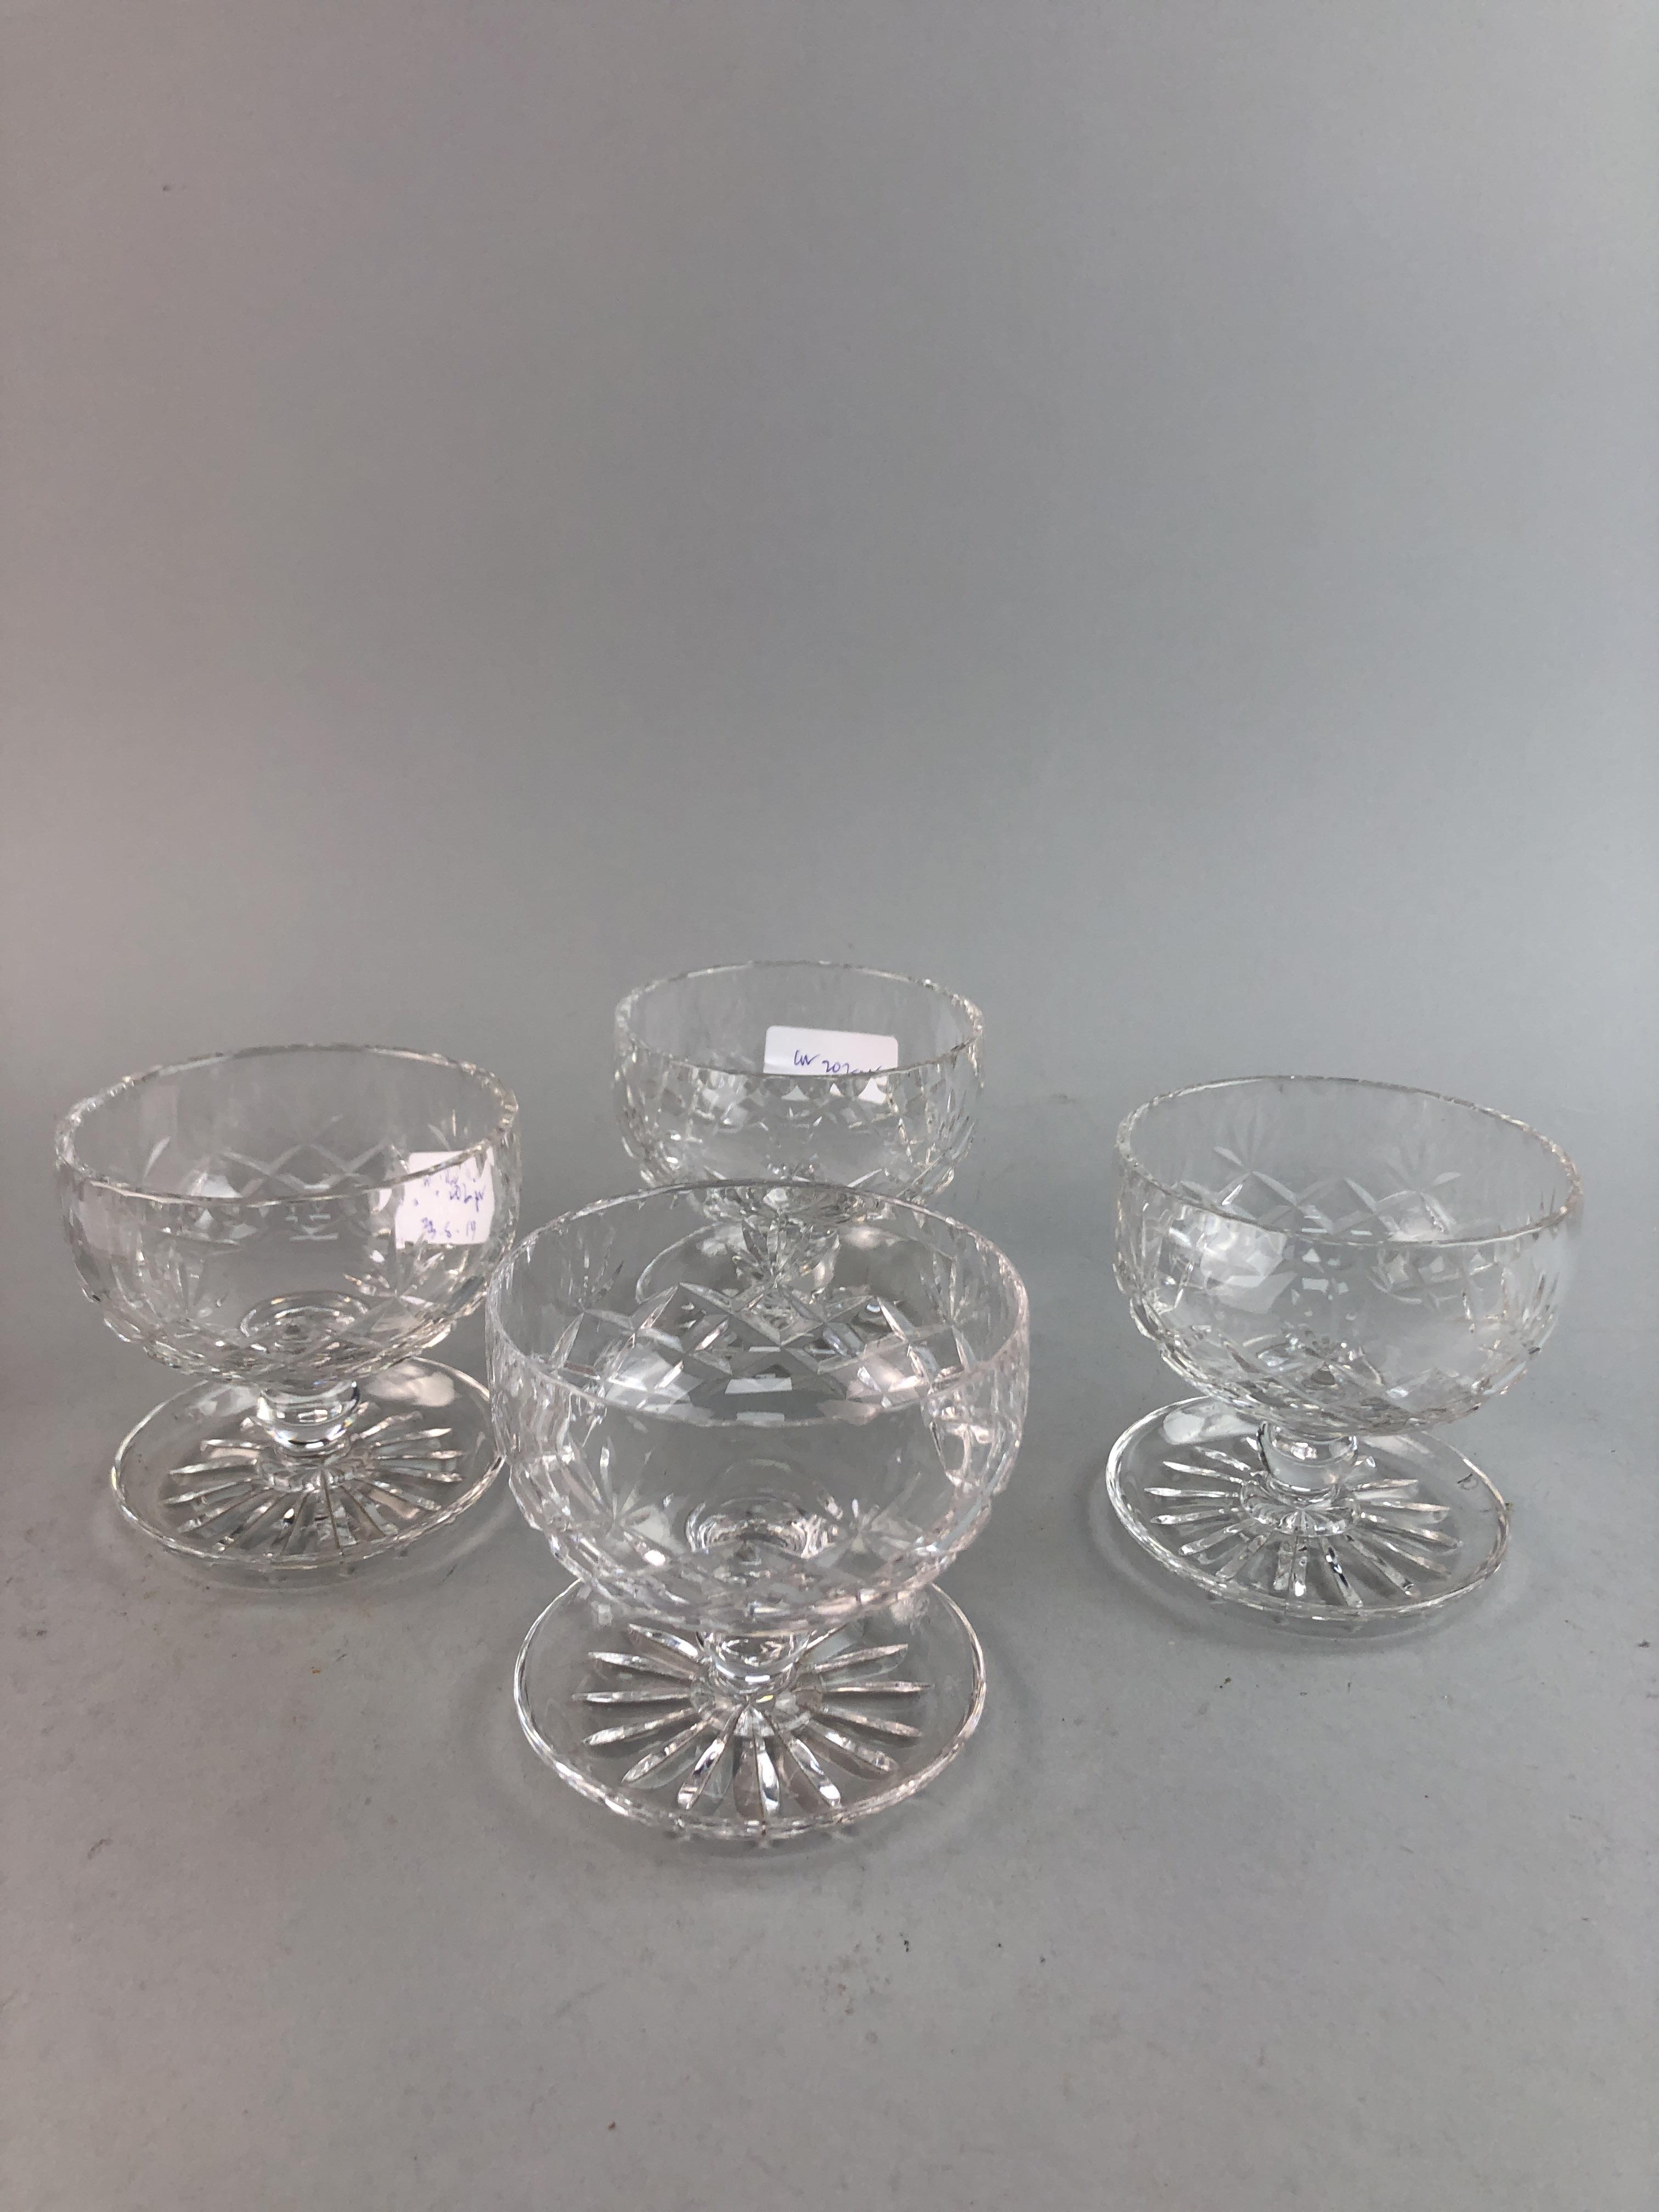 A GLASS FRUIT BOWL WITH A PLATED RIM AND OTHER GLASSWARE - Image 3 of 4